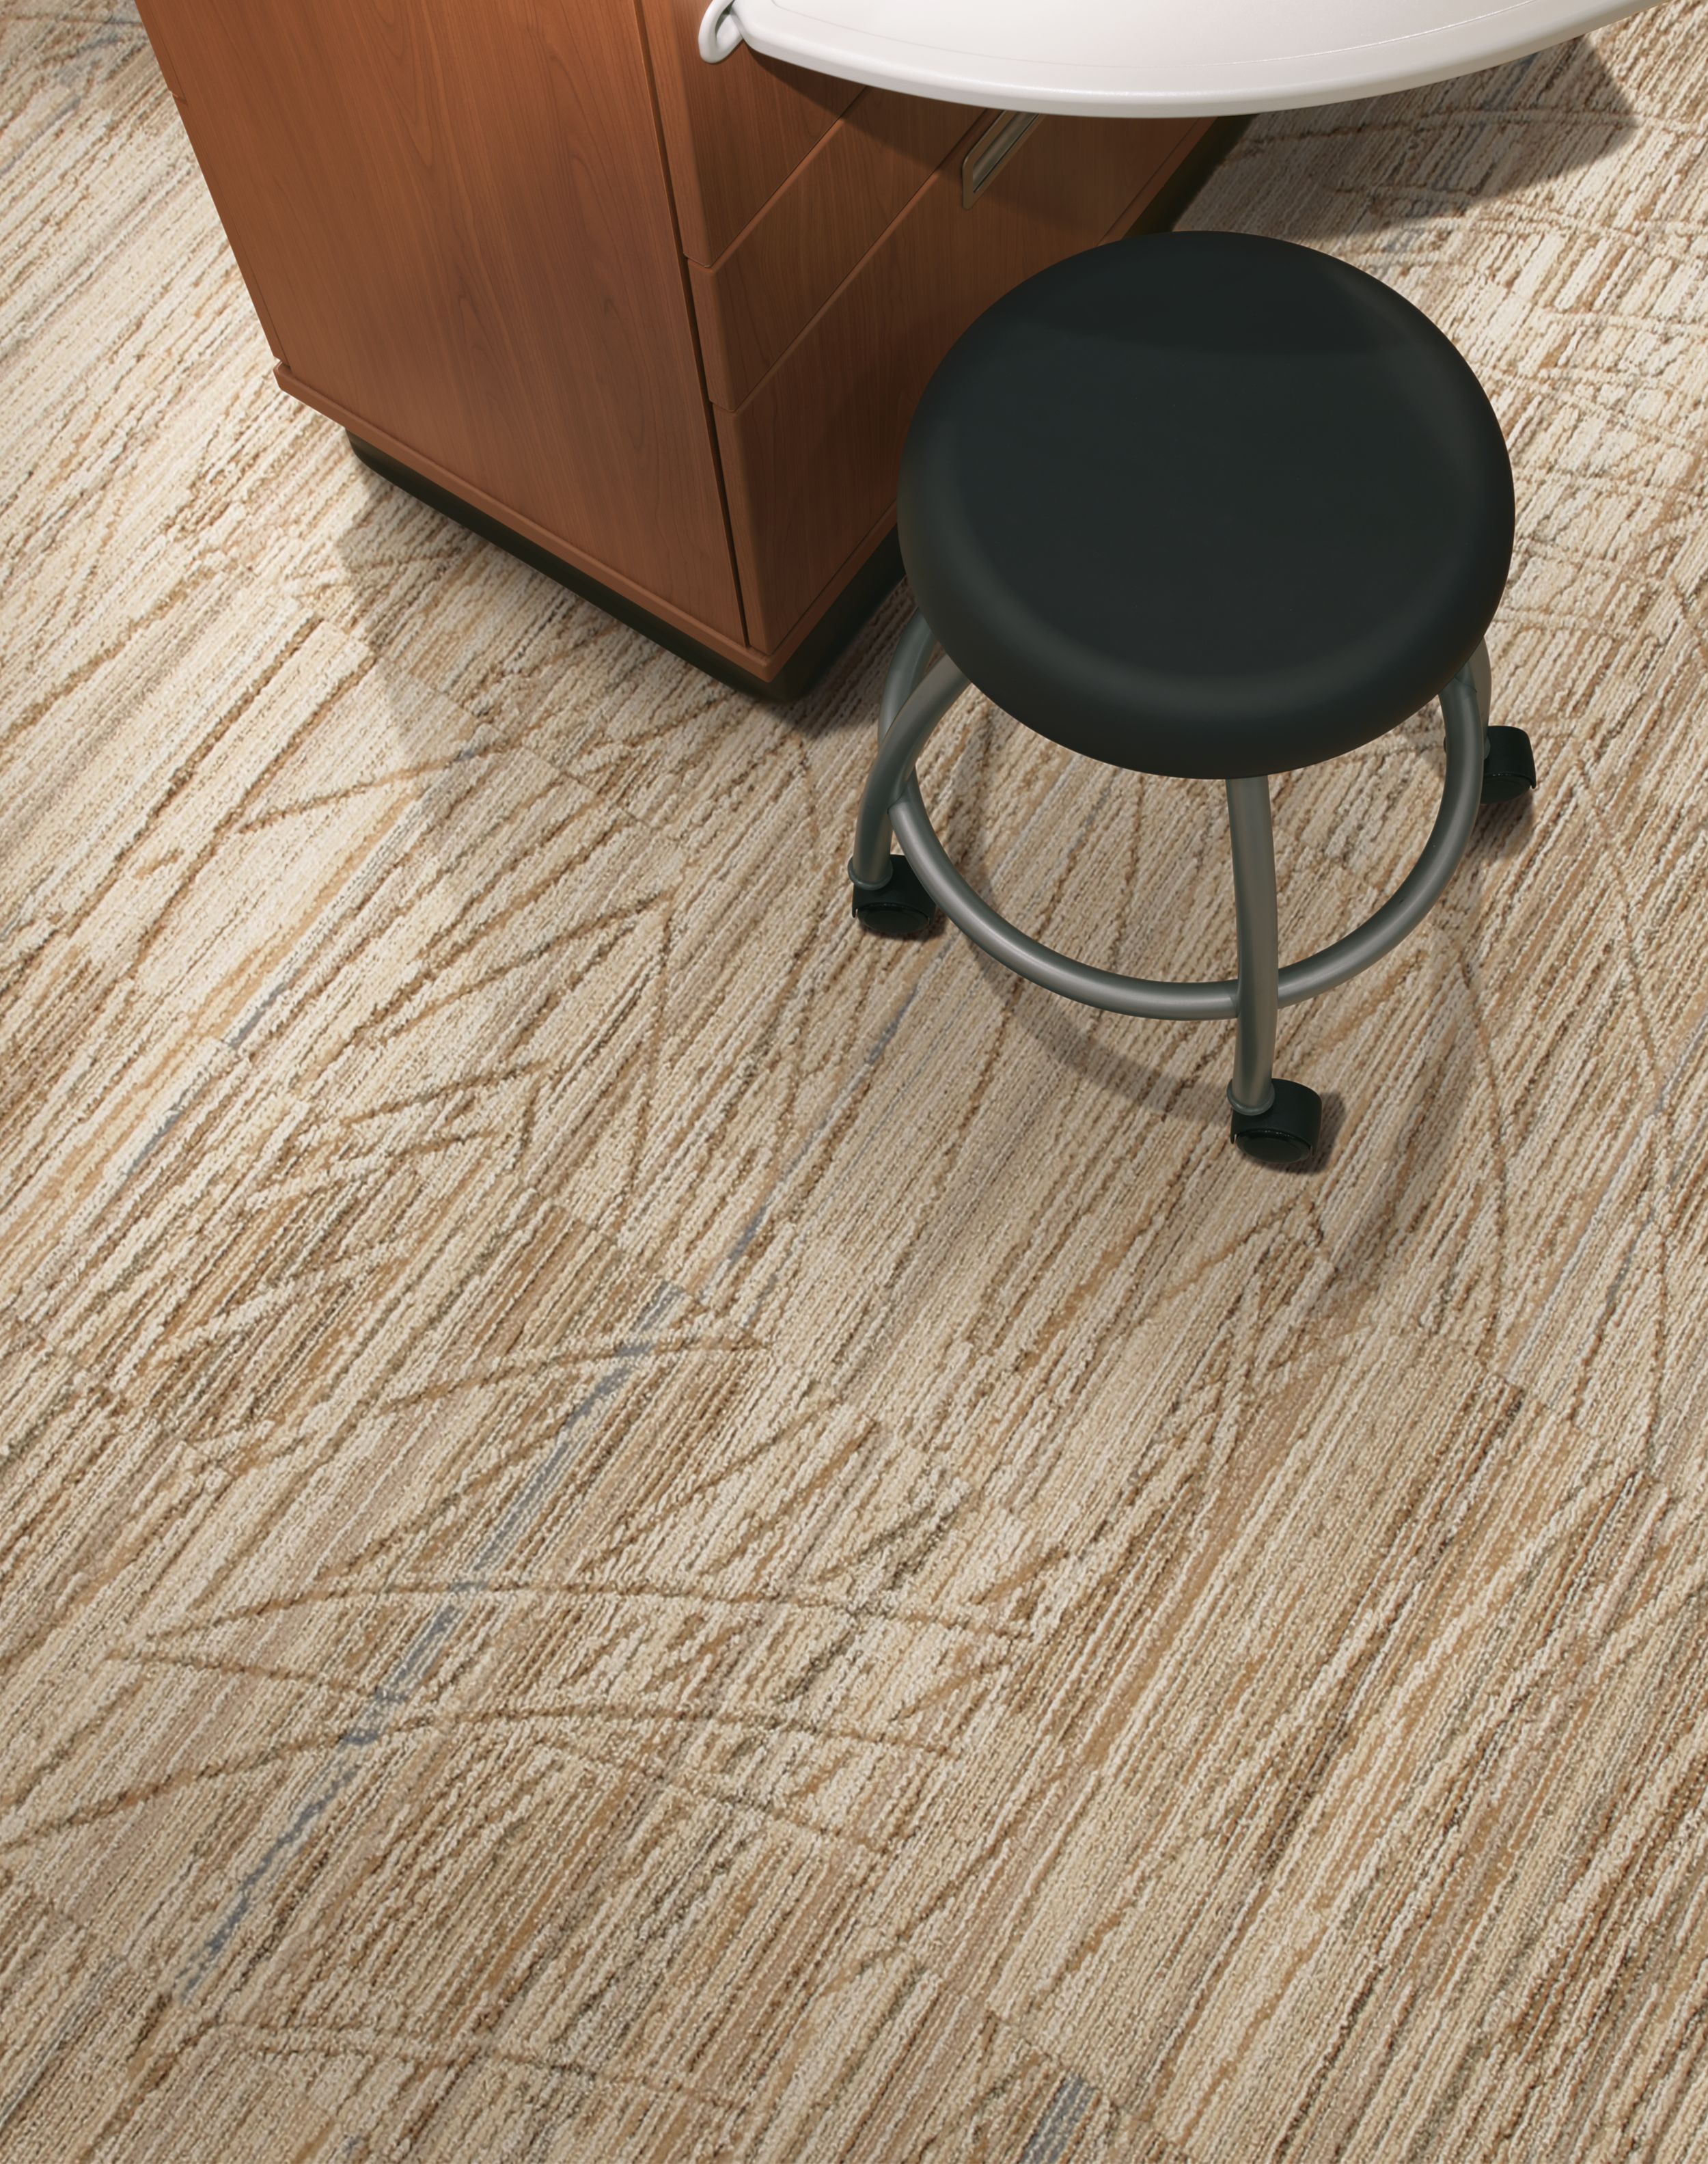 Interface Prairie Grass carpet tile in close up view with stool and cabinet image number 2